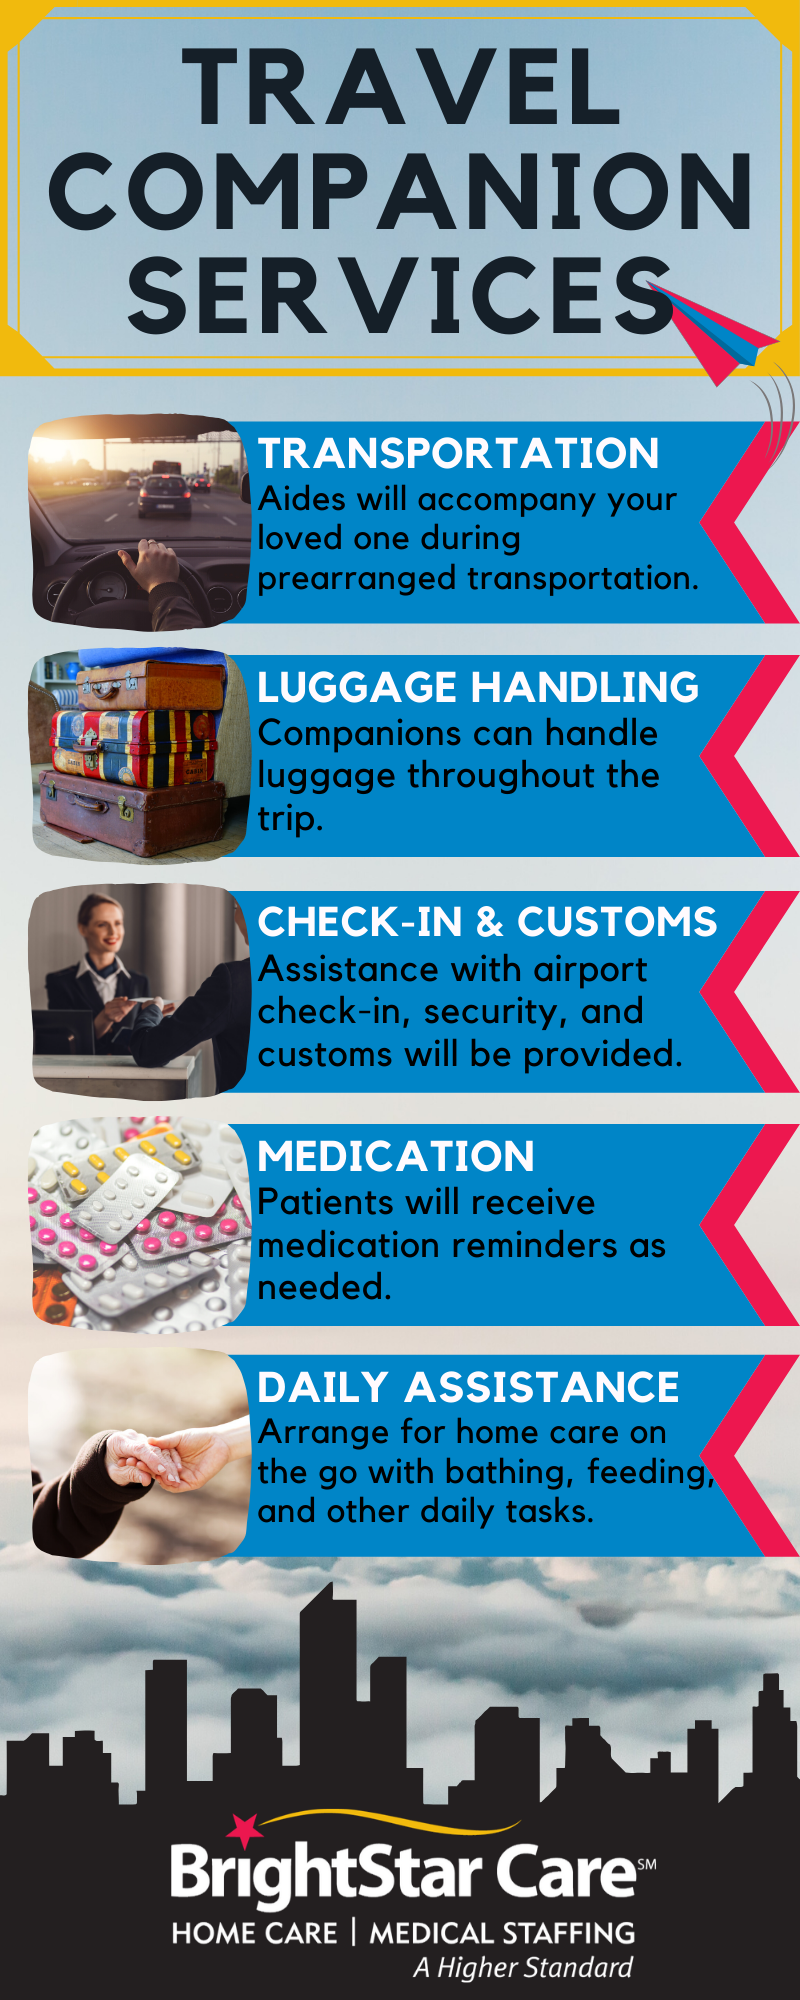 BrightStarCare_2019-Travel-Companion-Services-Infographic-UPDATED.png